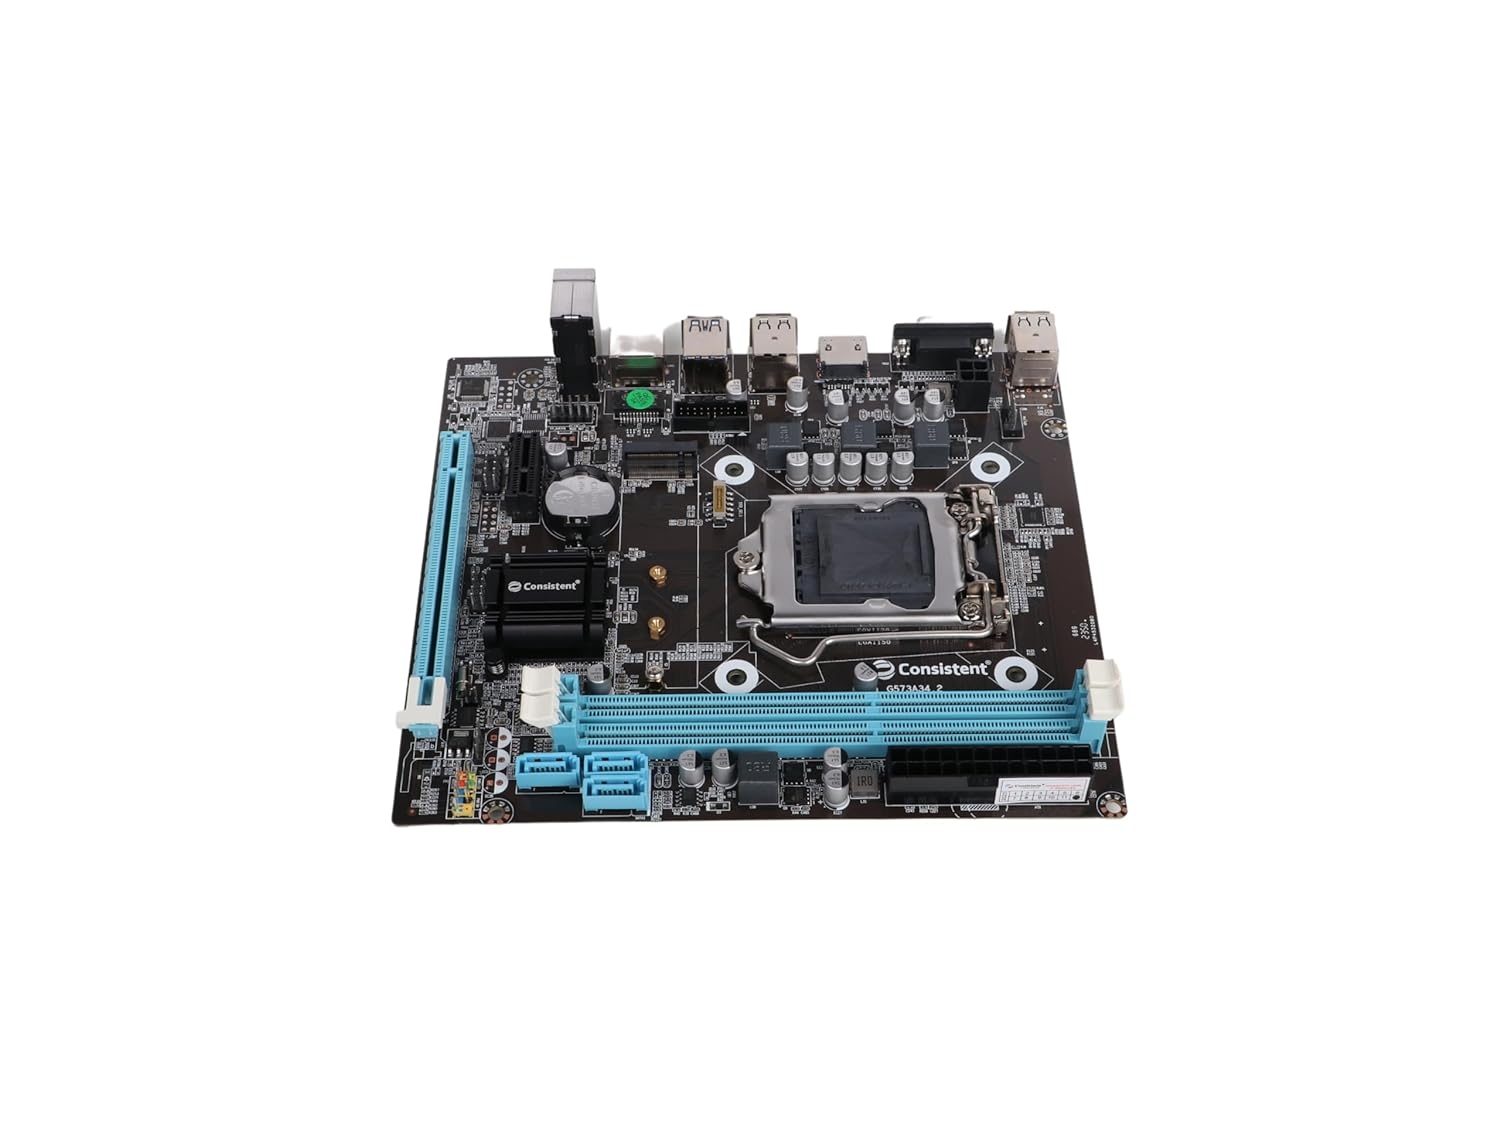 Consistent H-81 Motherboard 4th Gen i3, i5, i7, DDR3 Slots for RAM | GMA 950 Graphic Card, Motherboard | Sound Card, SATA 2&3, 3Y Warranty